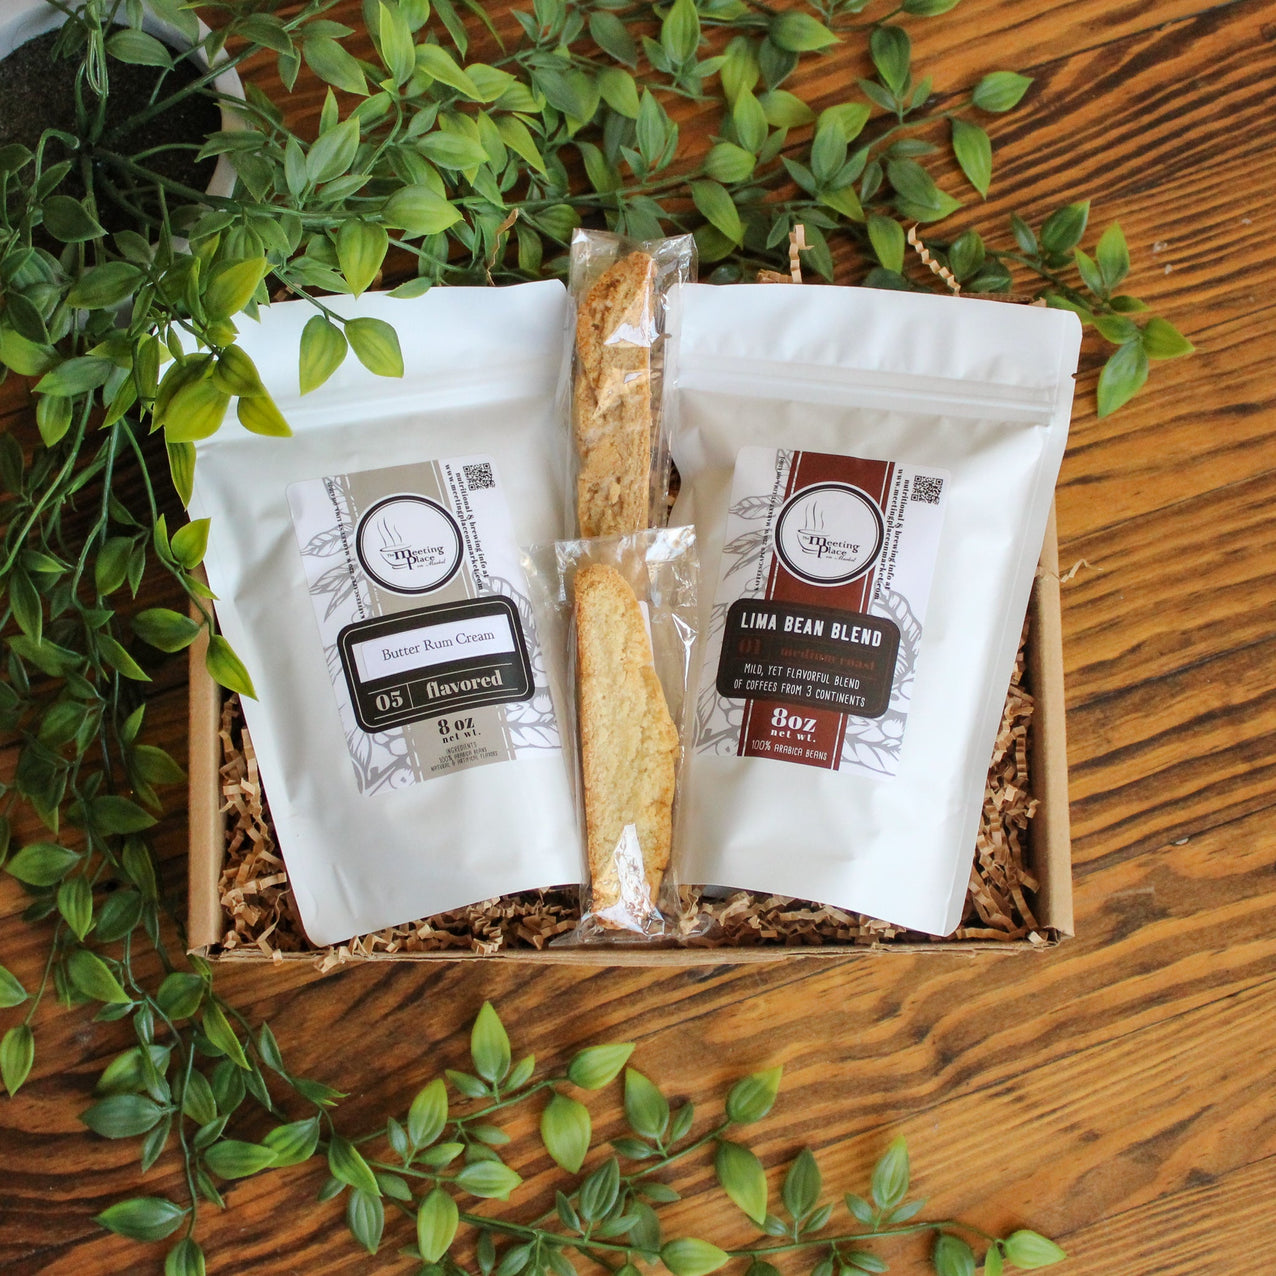 New Year Premium Gourmet Coffee Gift Set New Year Gift - The Meeting Place on Market